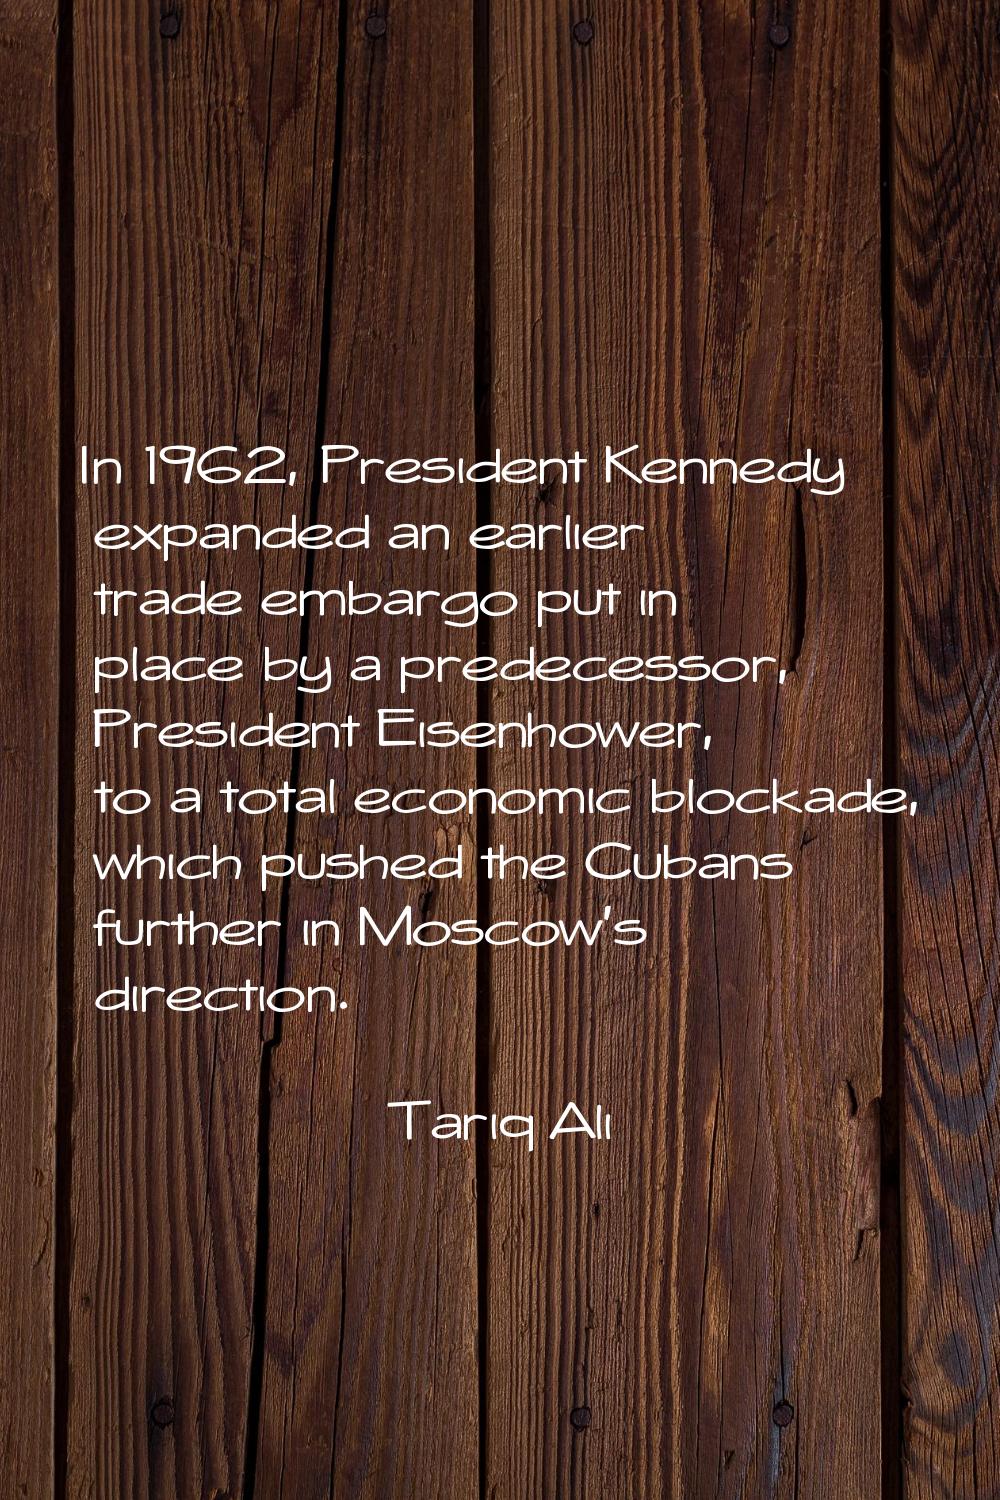 In 1962, President Kennedy expanded an earlier trade embargo put in place by a predecessor, Preside